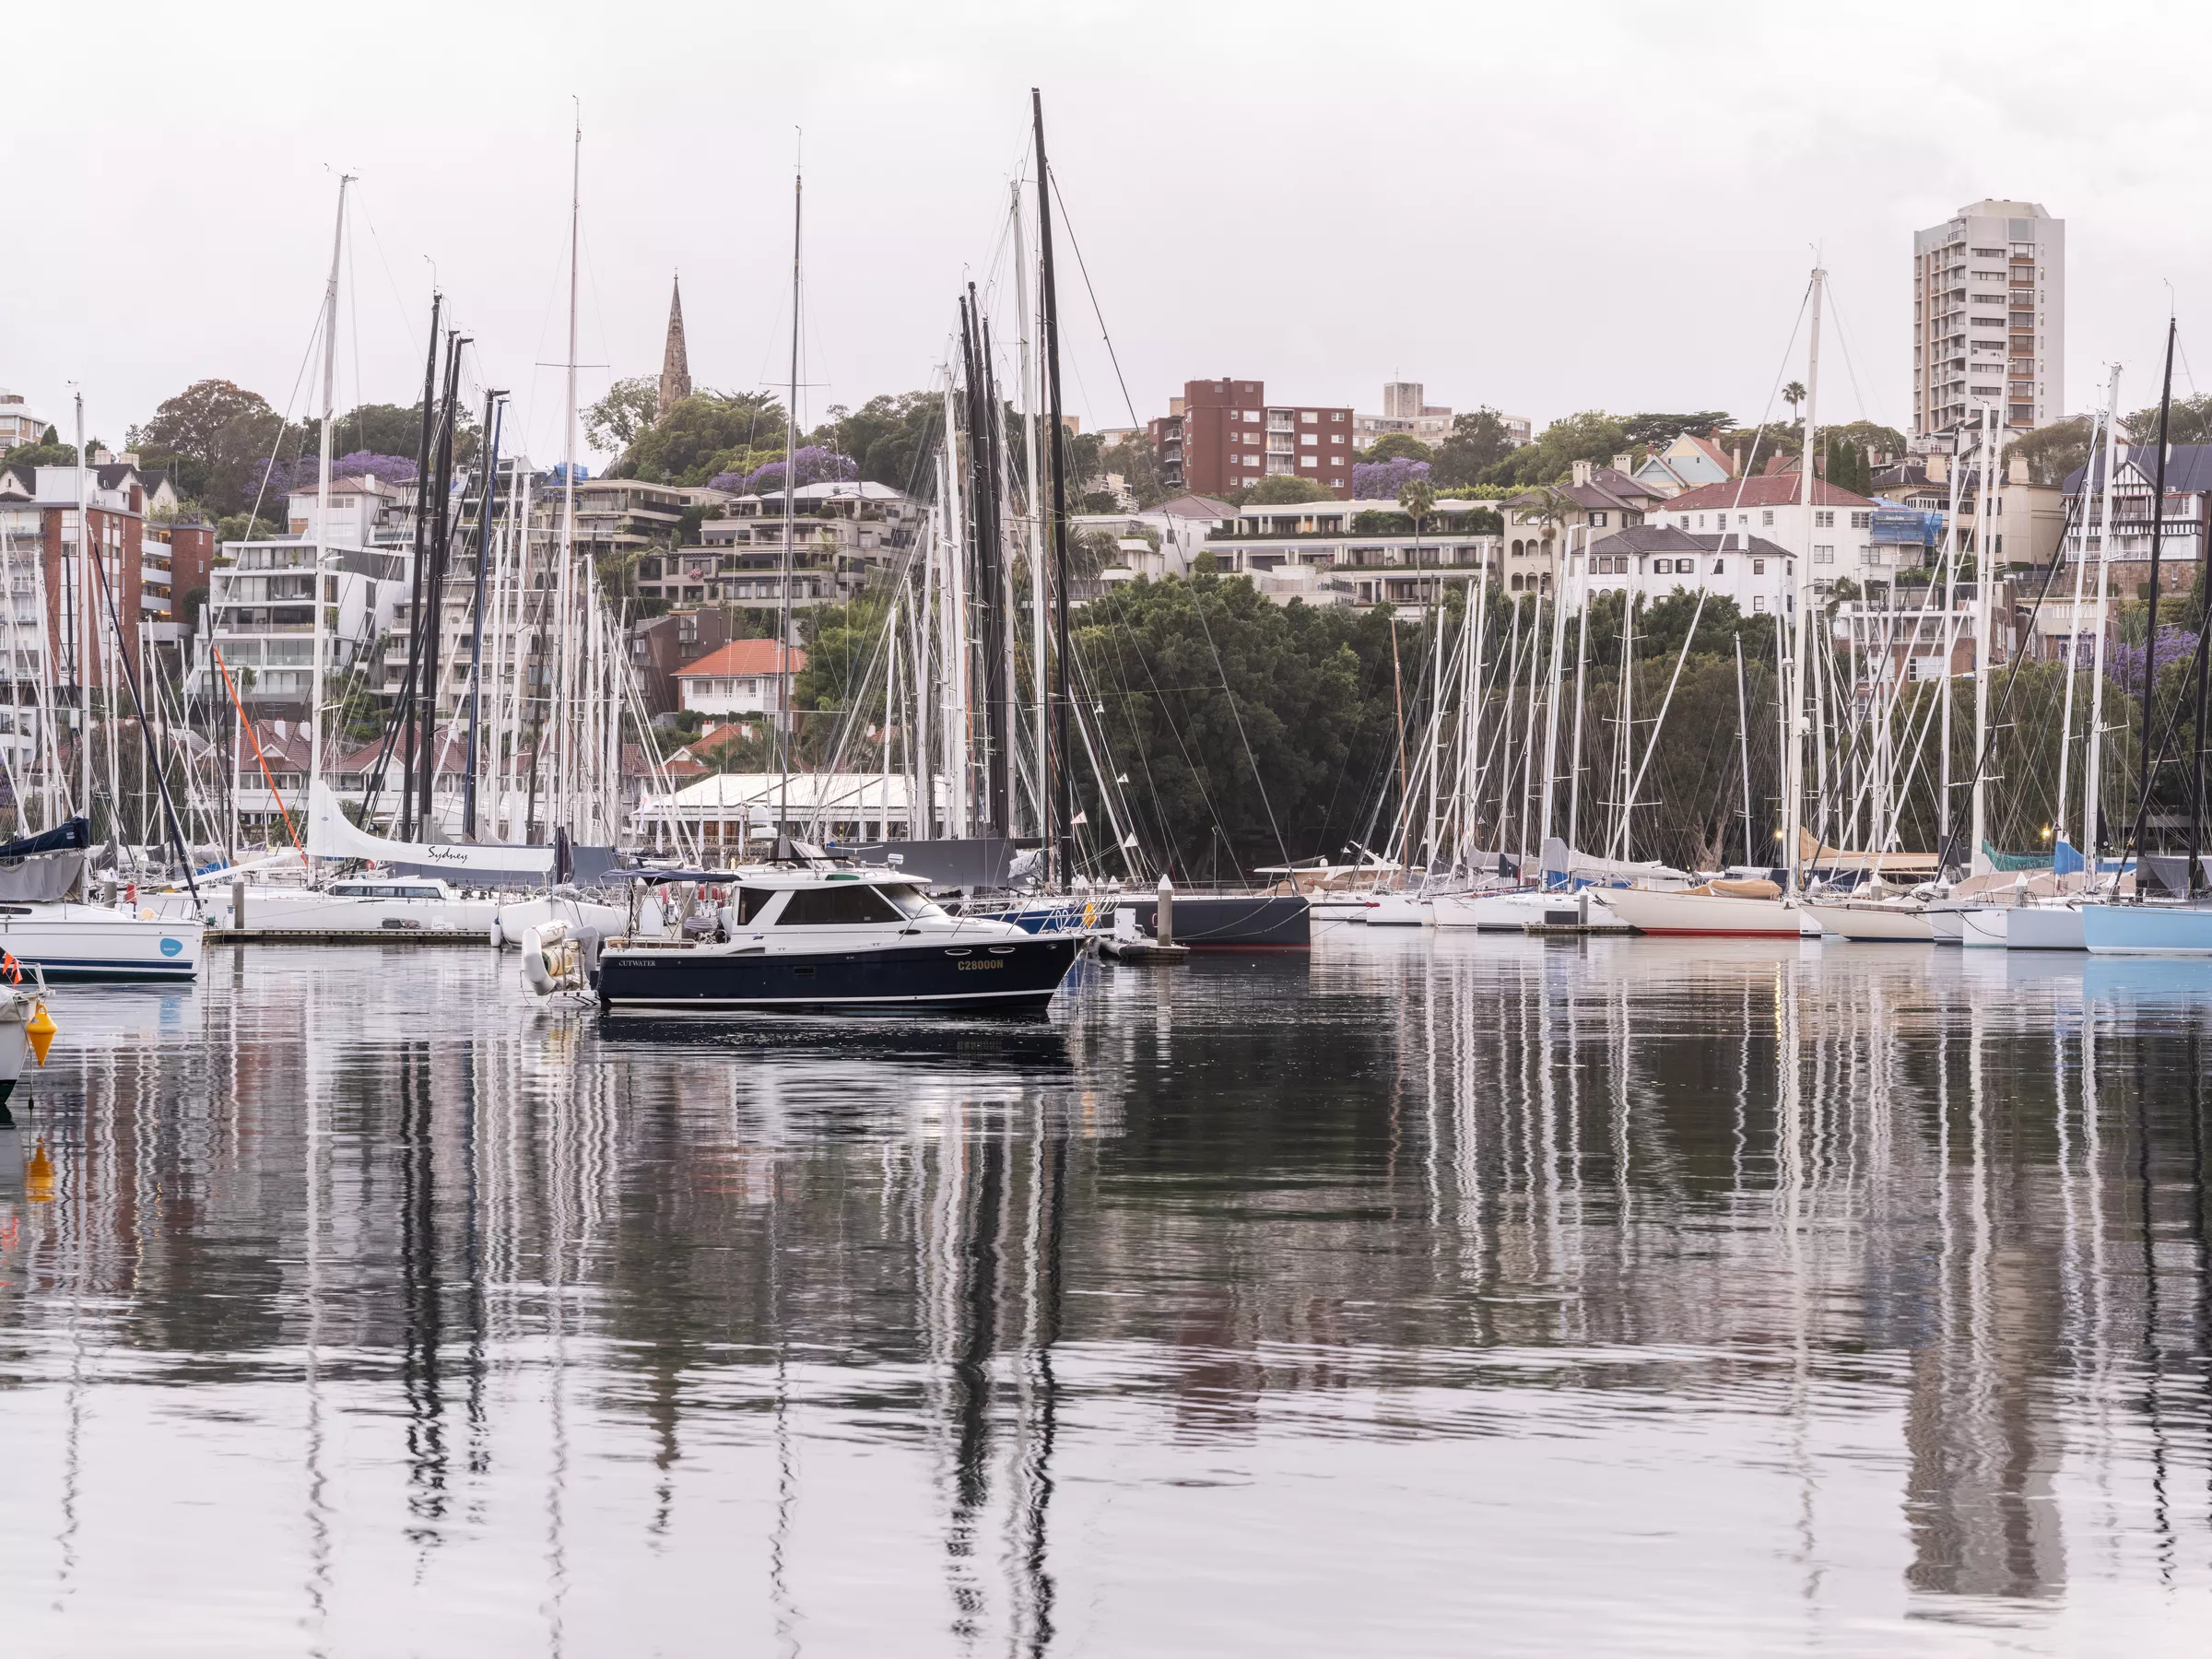 TREV - Trebartha Apartments - Village Photography  Harbour View of Boats